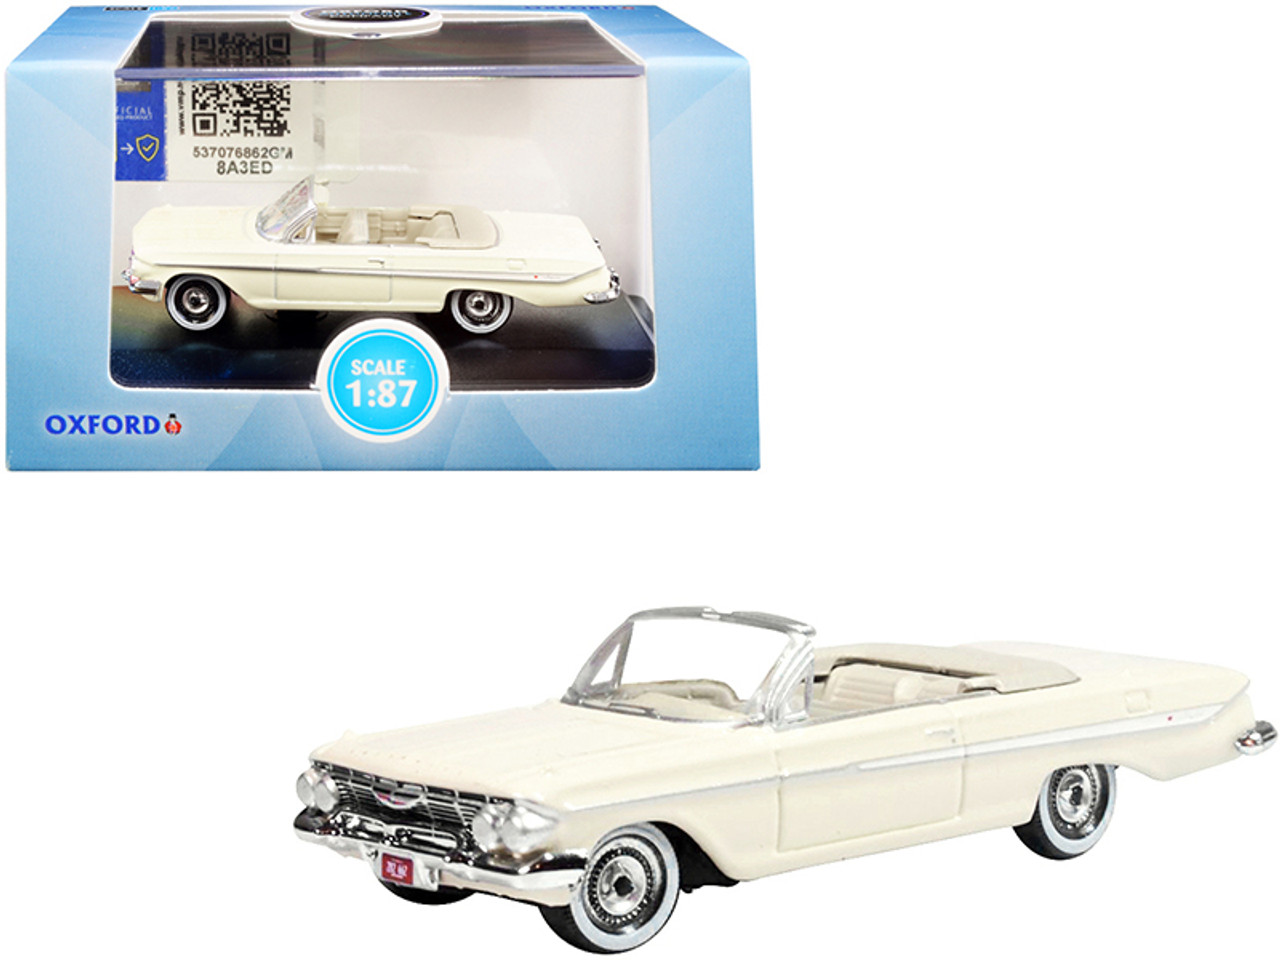 1961 Chevrolet Impala Convertible Almond Beige 1/87 (HO) Scale Diecast Model Car by Oxford Diecast